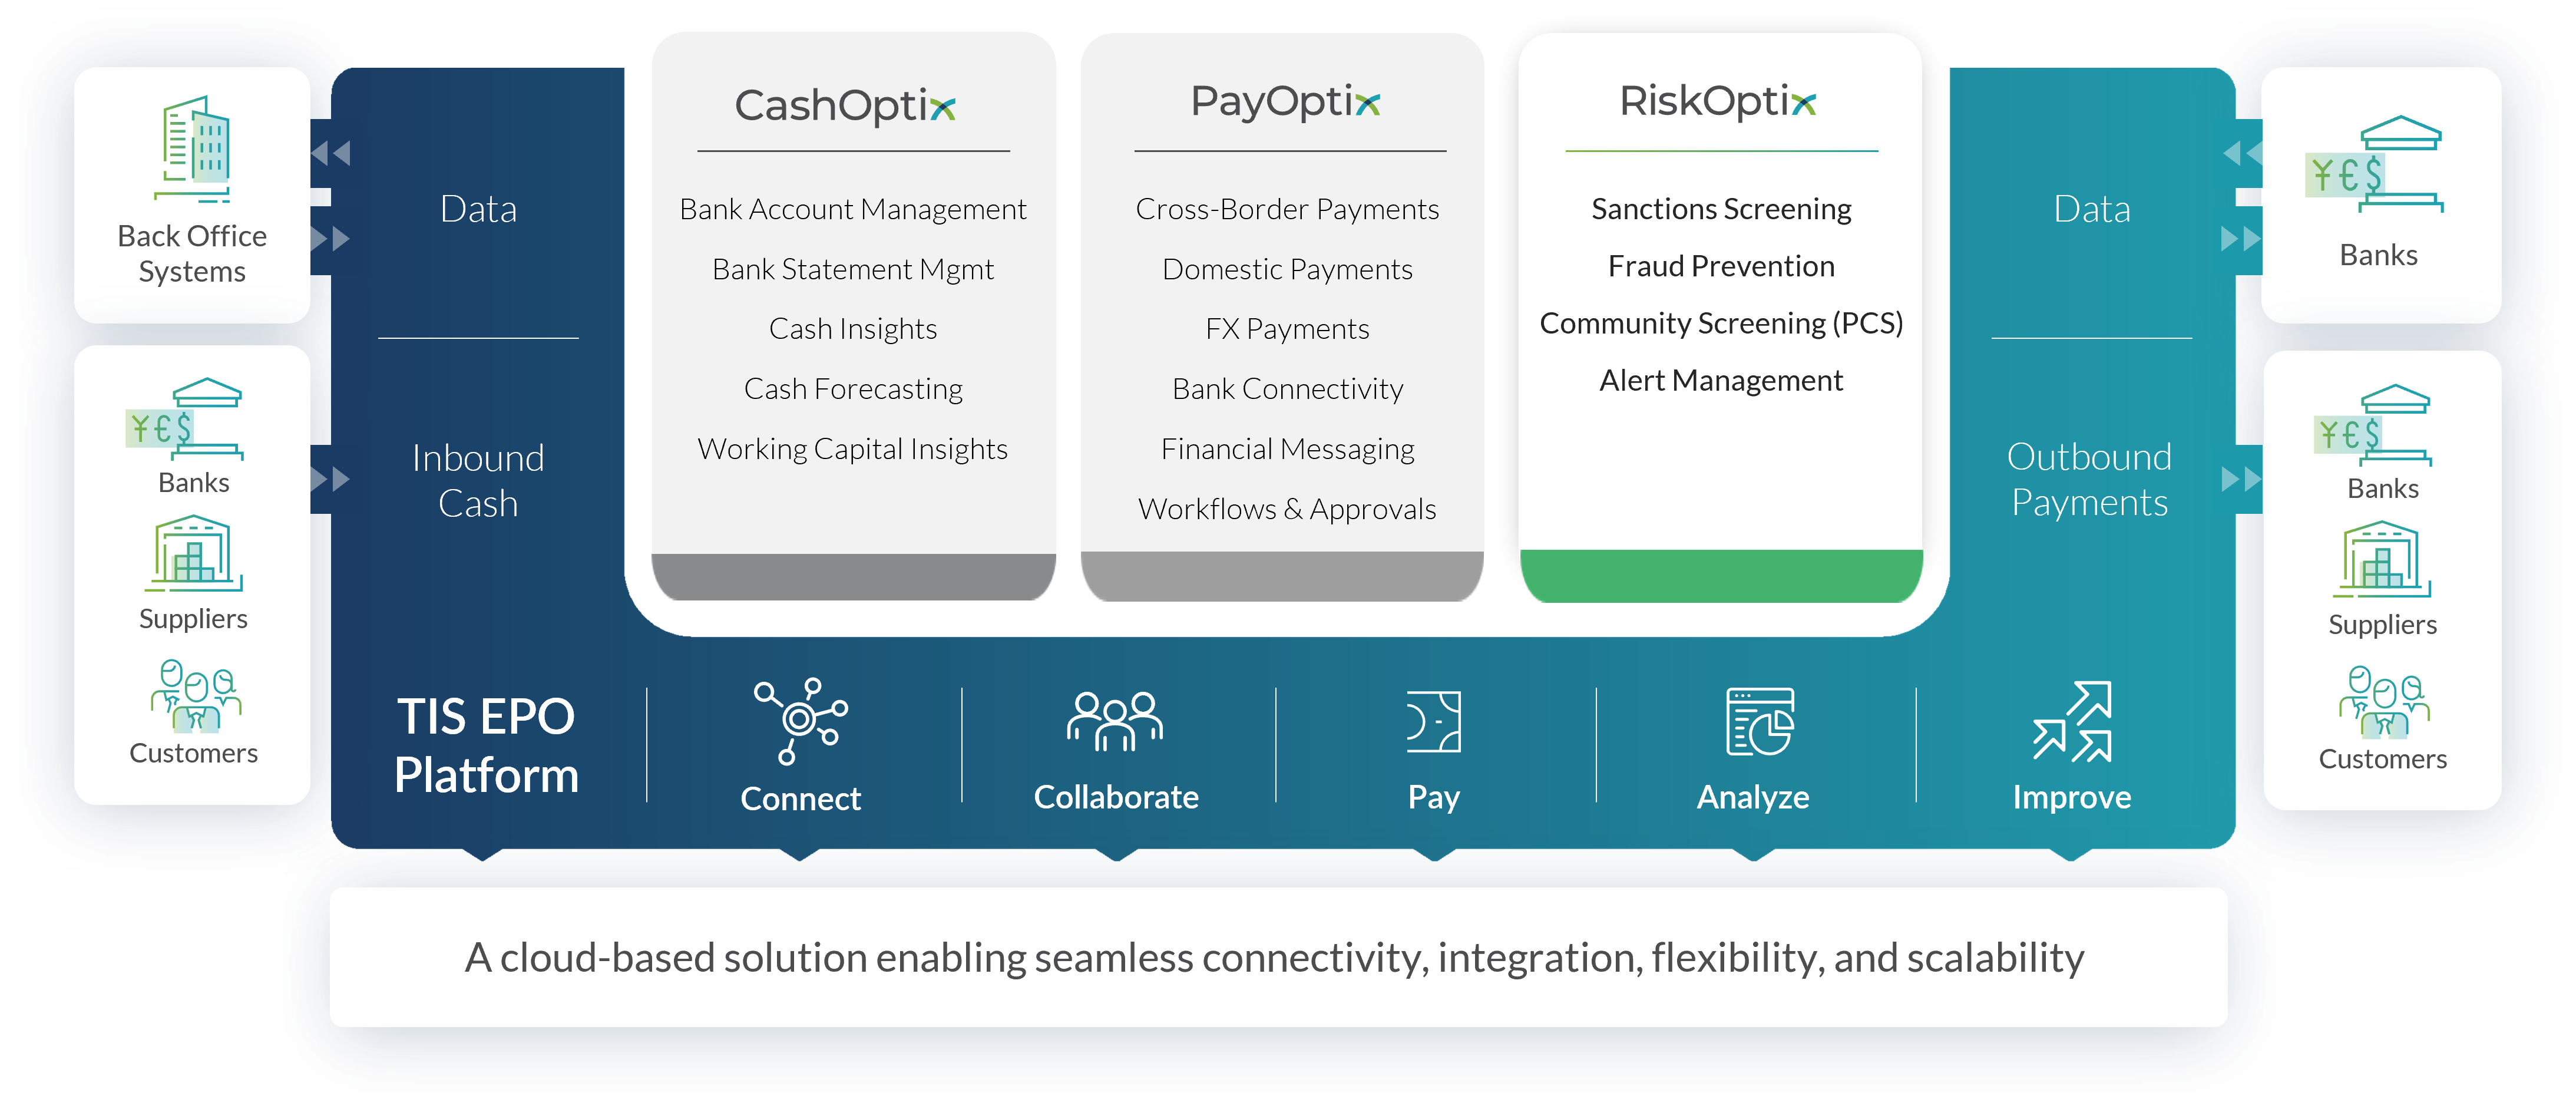 This image highlights the suite of compliance, sanctions screening, and fraud prevention tools that TIS provides to clients. 